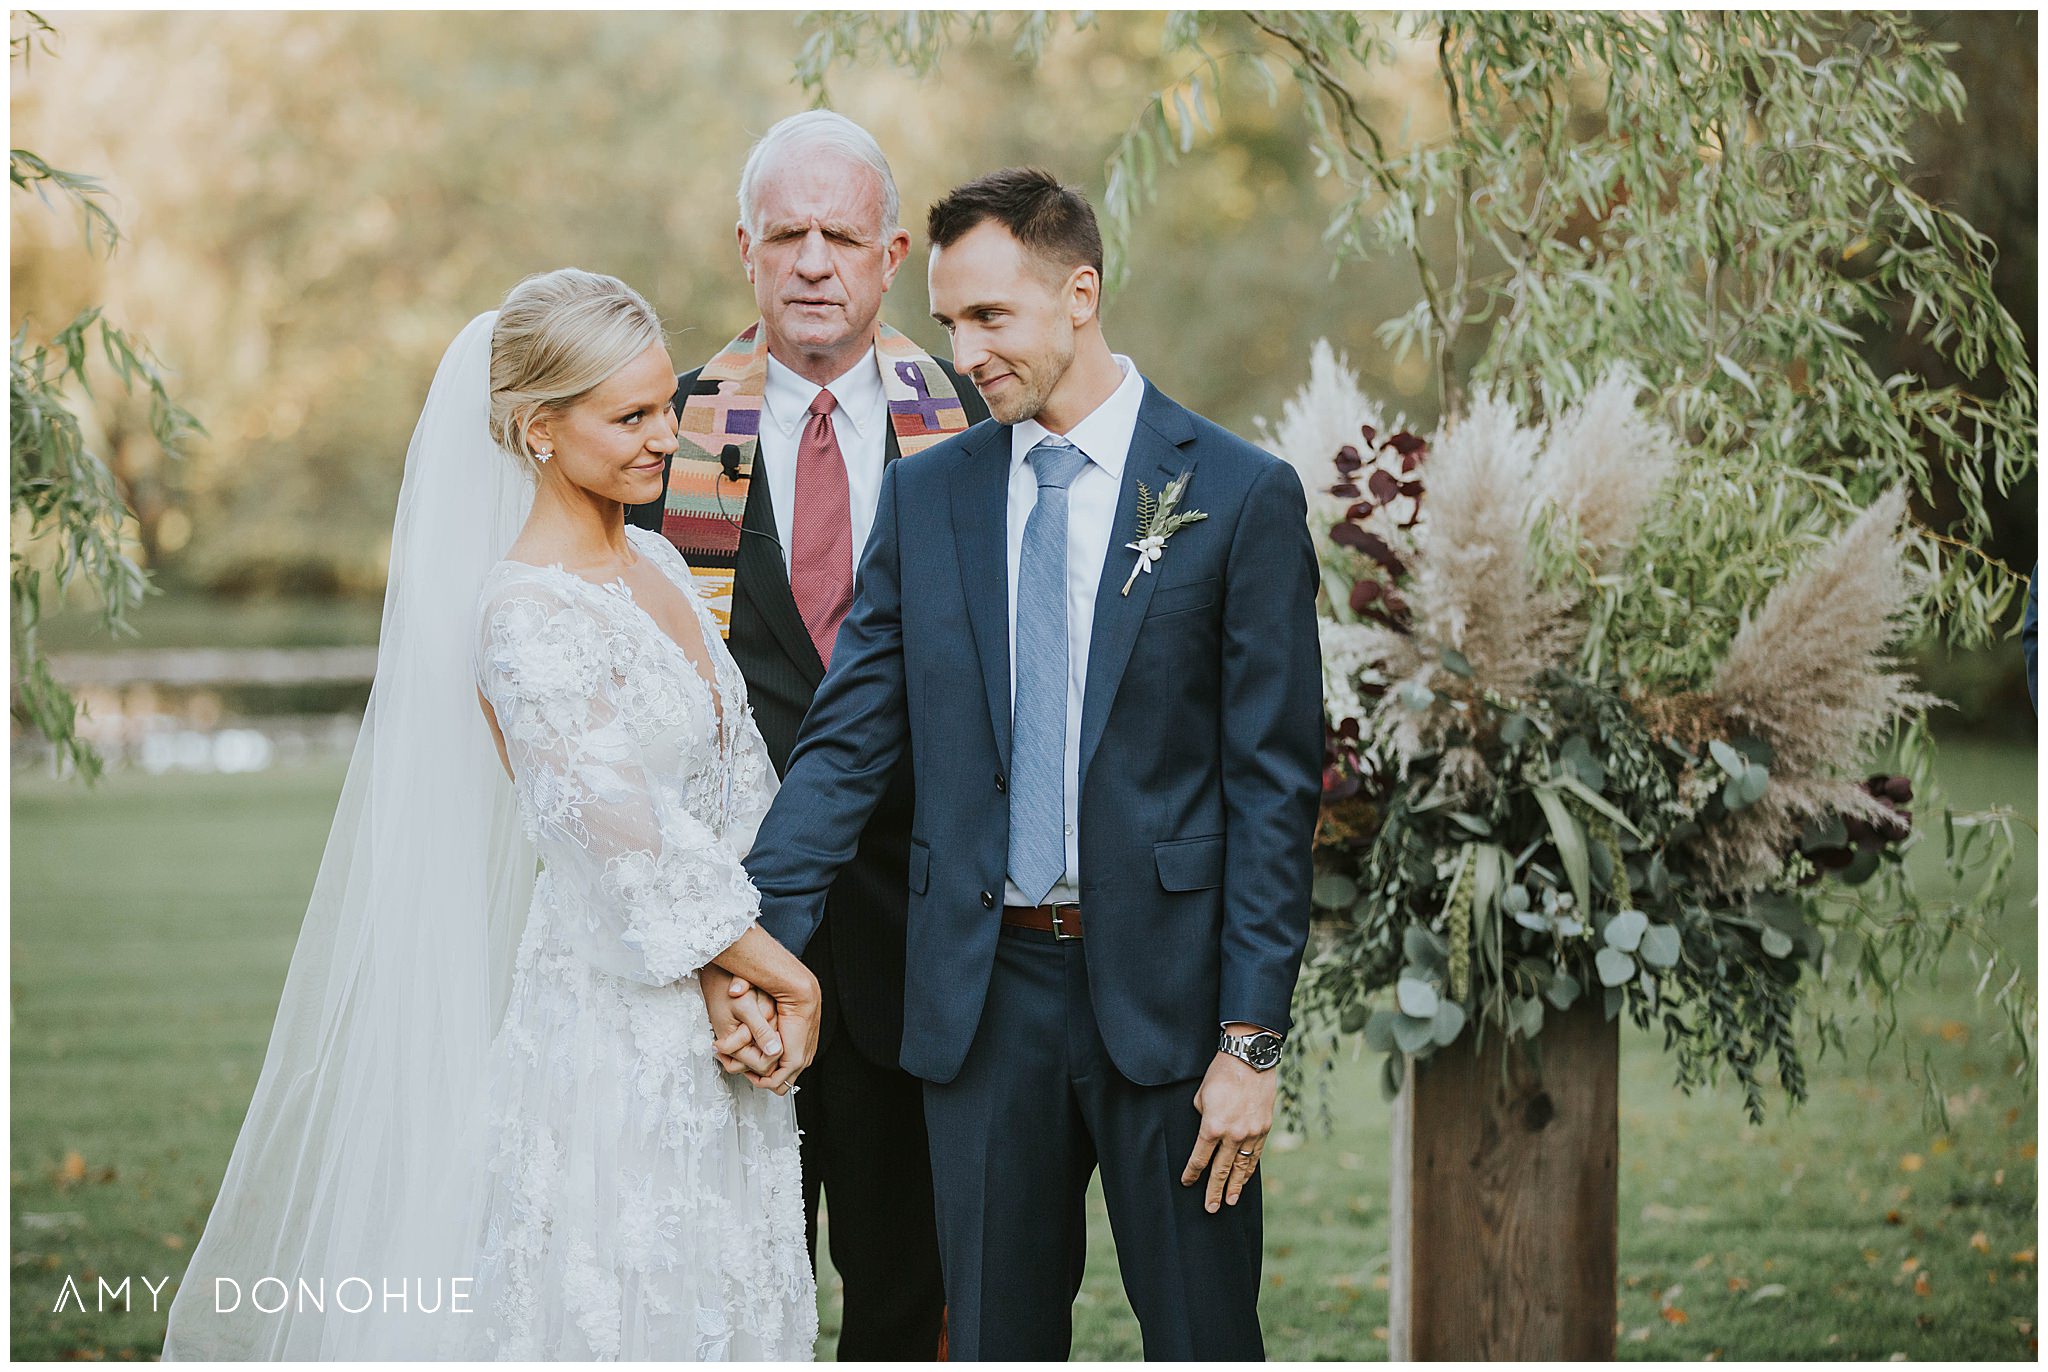 Fall Wedding Ceremony at the Equinox Resort with florals by Jasper and Prudence | Vermont Wedding Photographer | © Amy Donohue Photography